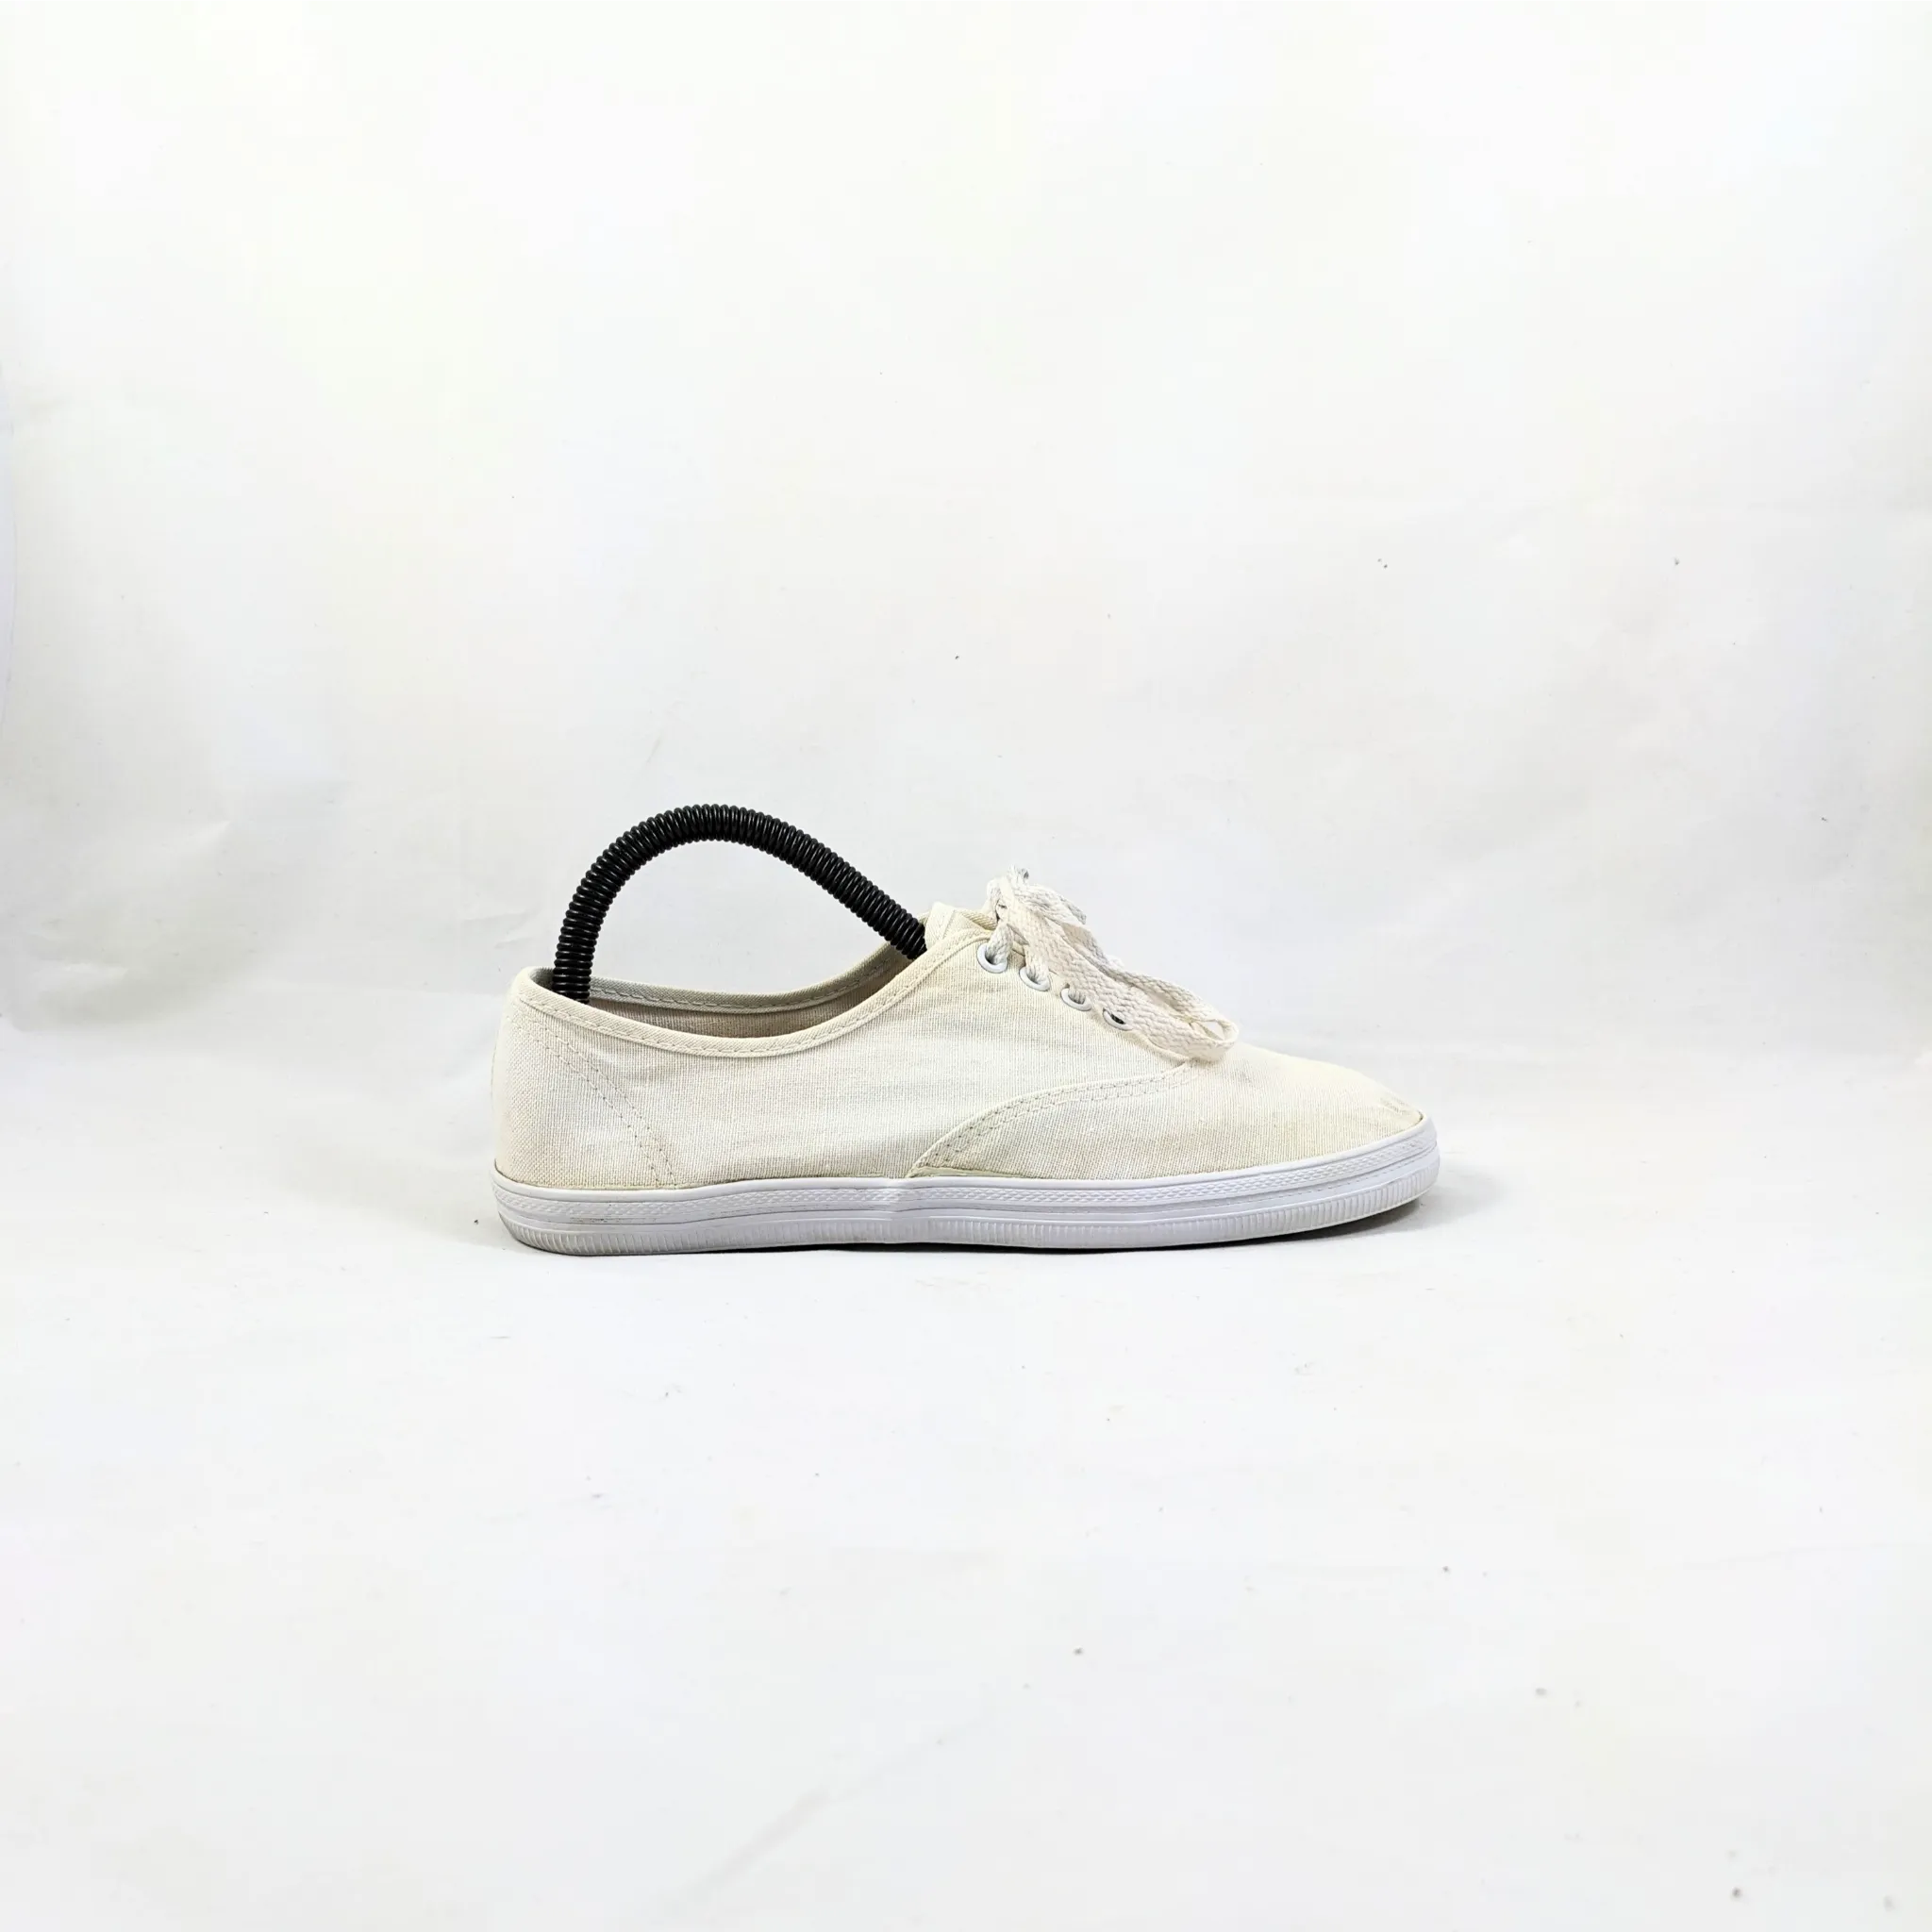 White City Sneakers